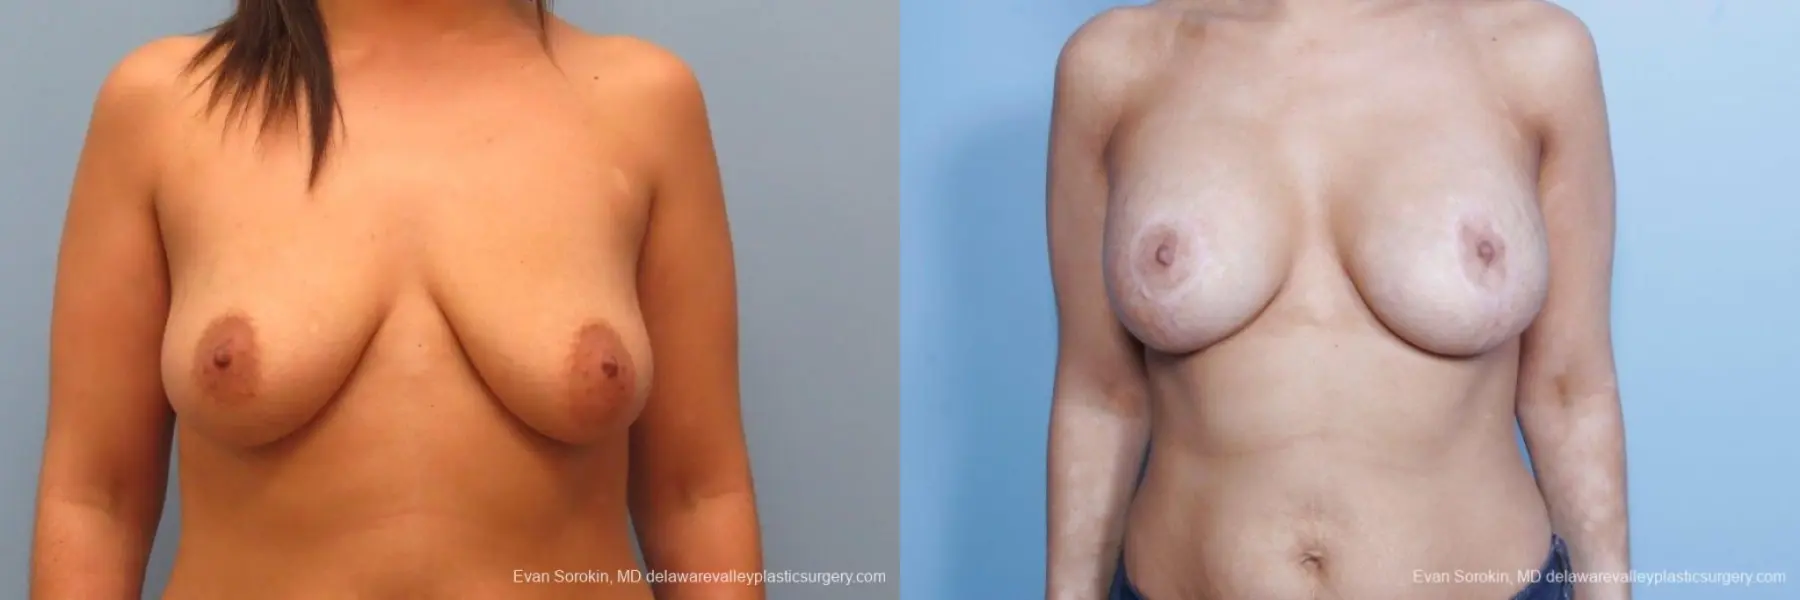 Philadelphia Breast Lift and Augmentation 8688 - Before and After